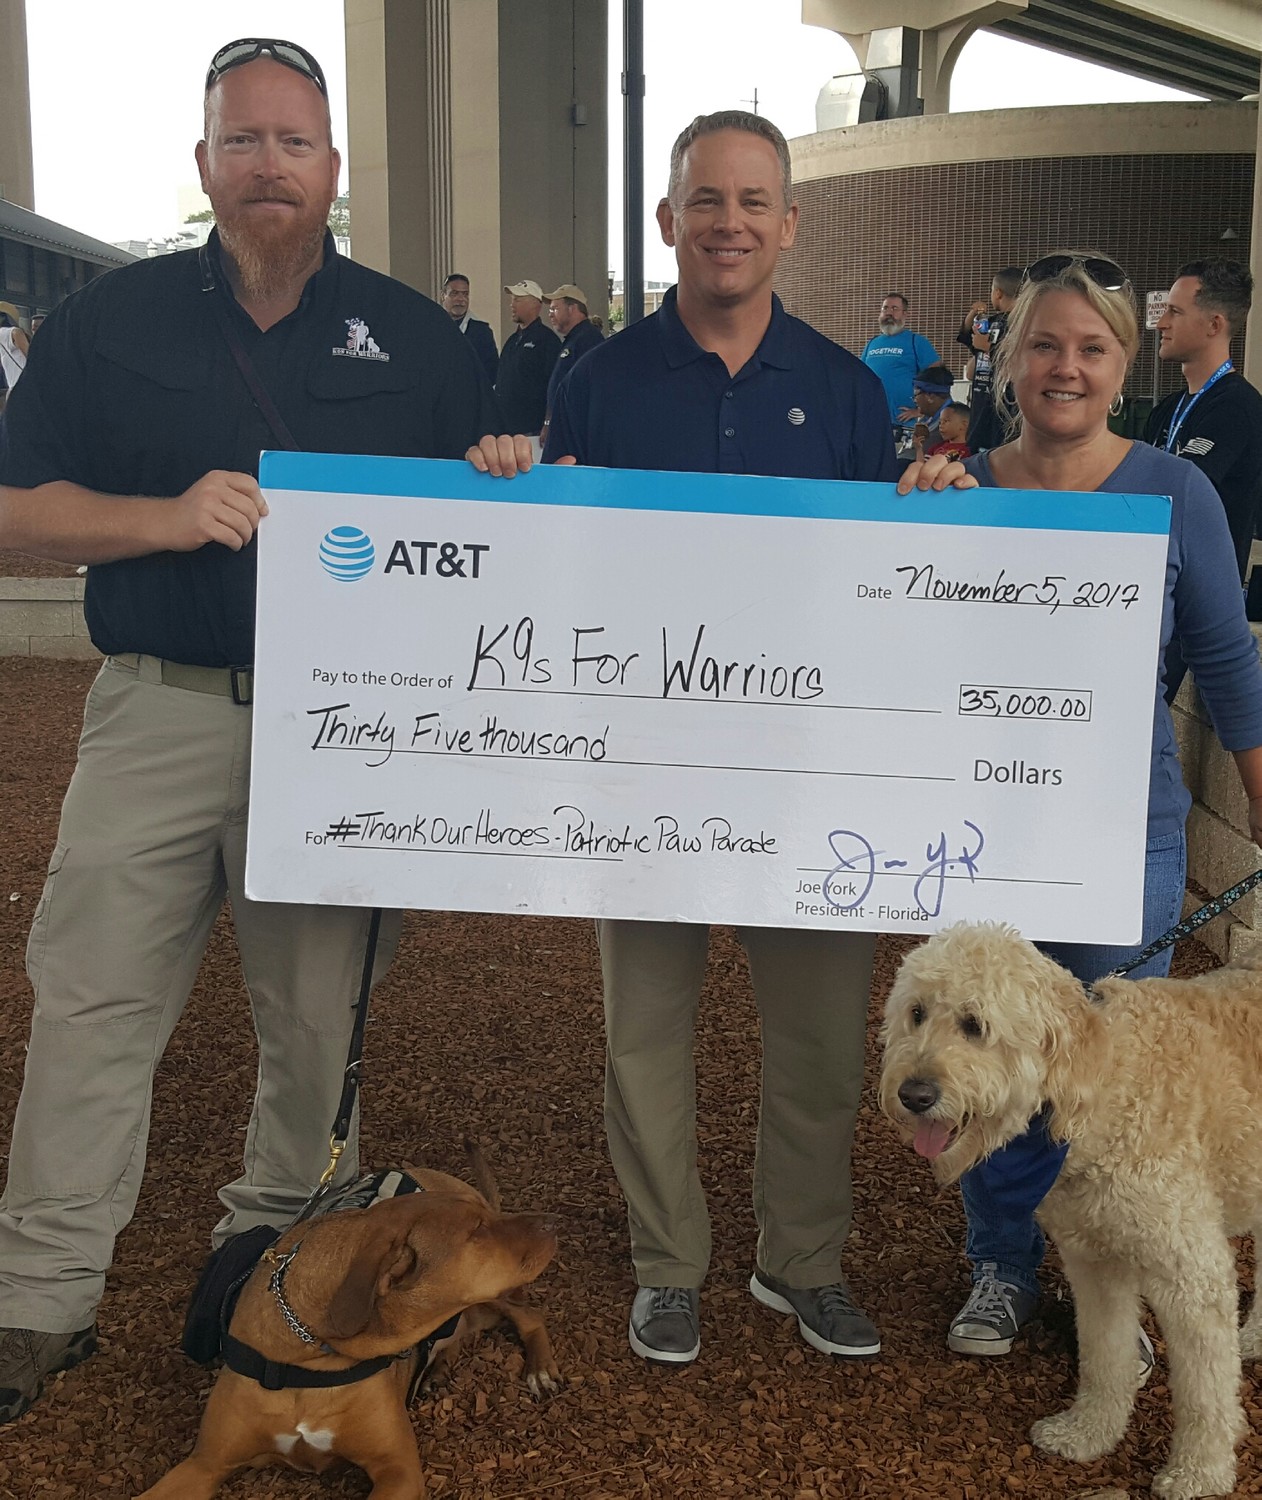 Greg Wells and Utah (left) receive a $35,000 check on behalf of K9s For Warriors from Joe York and Heather Duncan of AT&T. The company has partnered with the Ponte Vedra nonprofit as part of its Thank Our Heroes campaign. The $35,000 donation is part of a $500,000 contribution from AT&T to veterans organizations across the country.